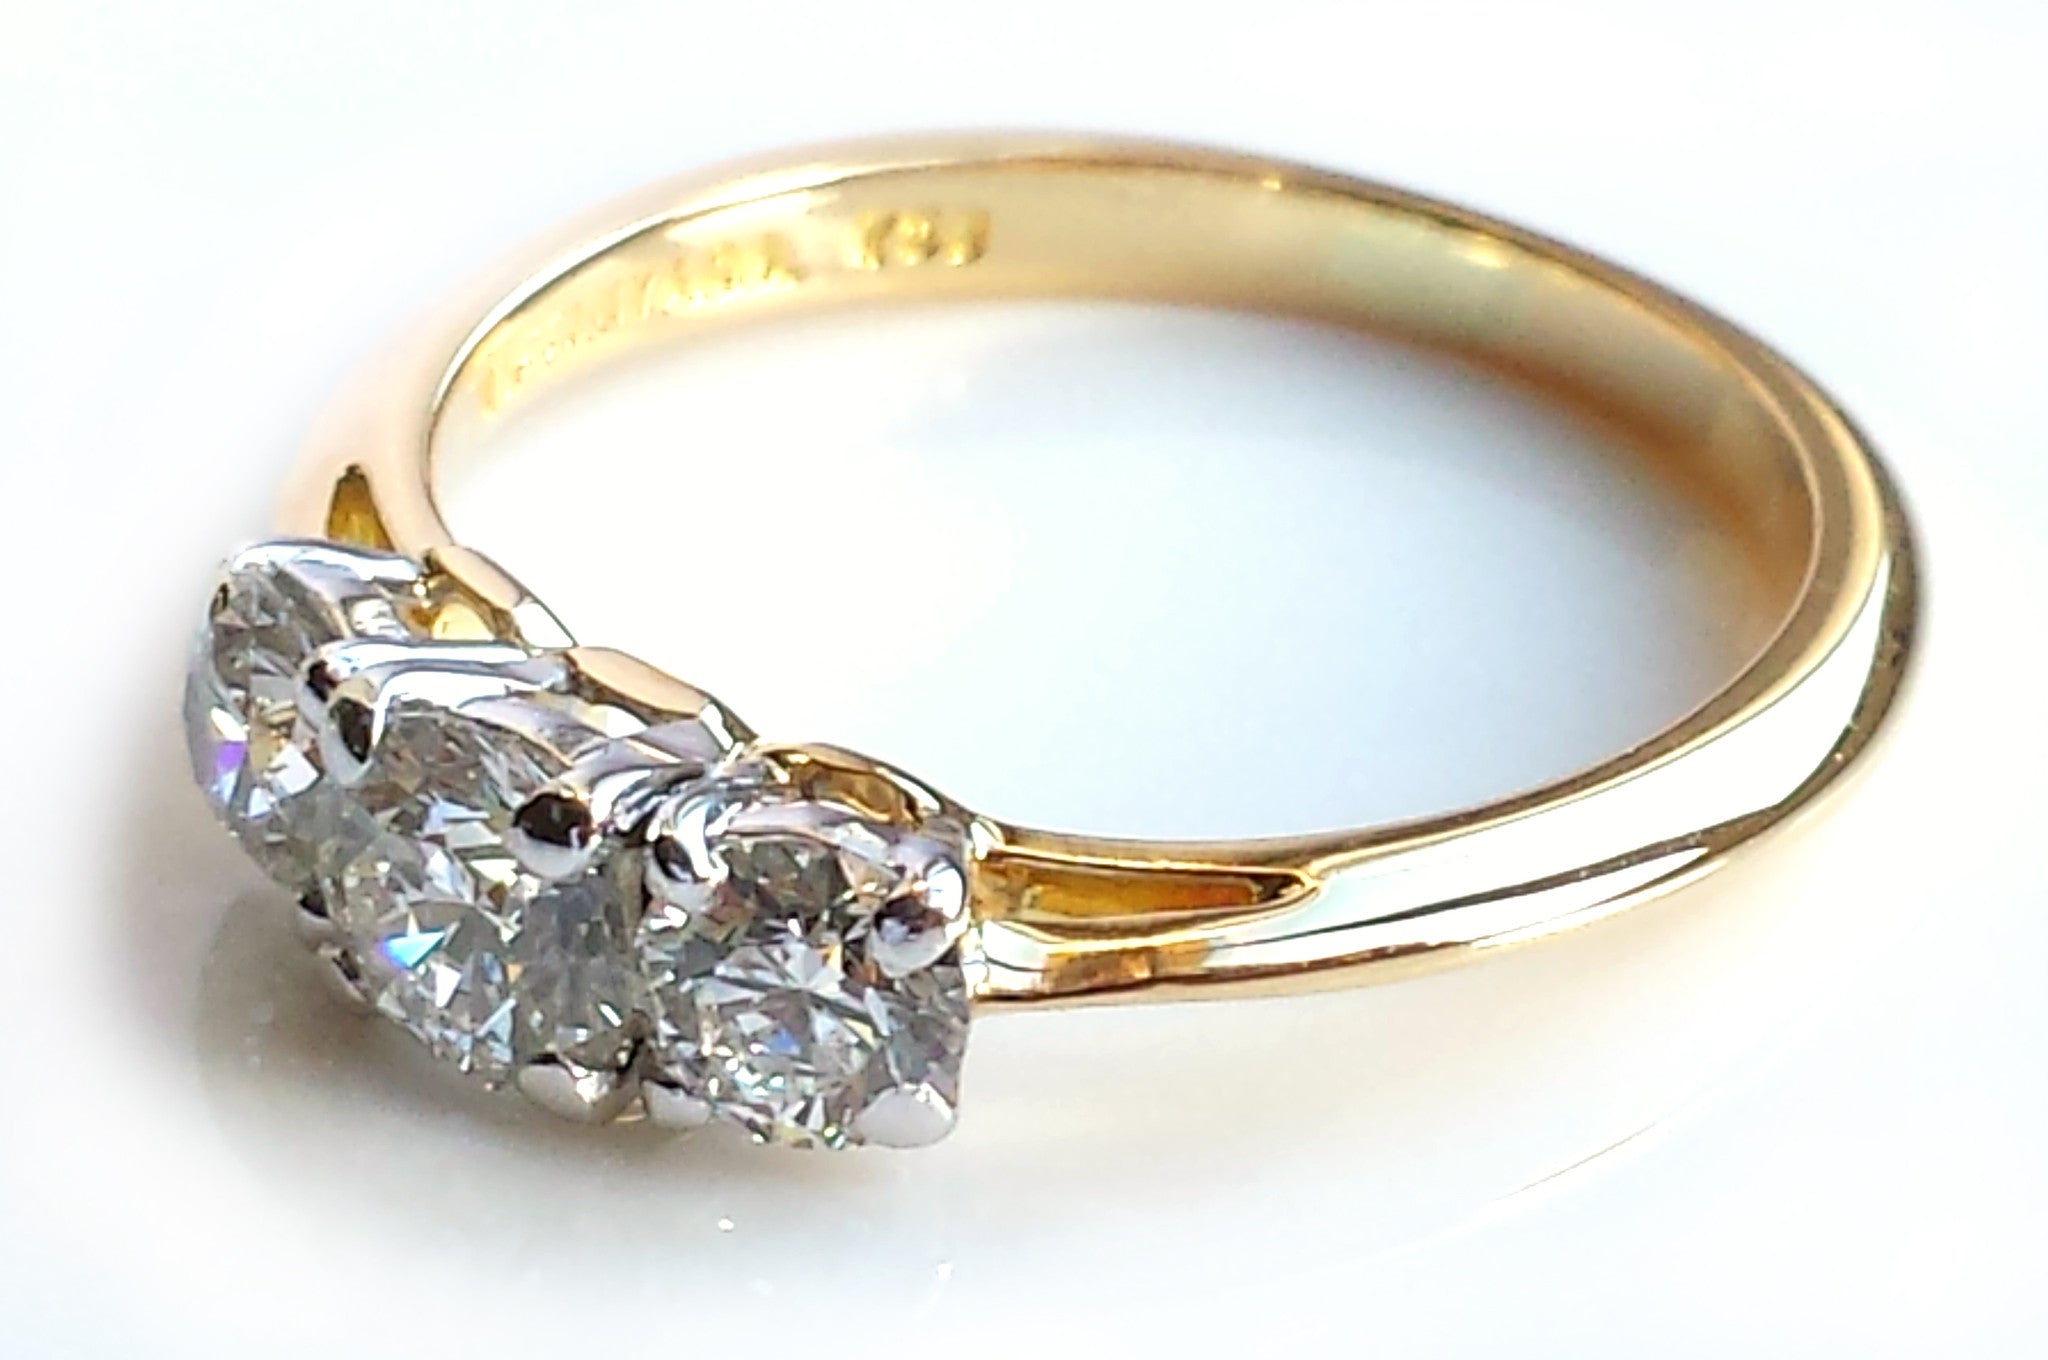 Vintage Tiffany & Co. 0.90ct 3-Stone Diamond Engagement Ring in 18K Go